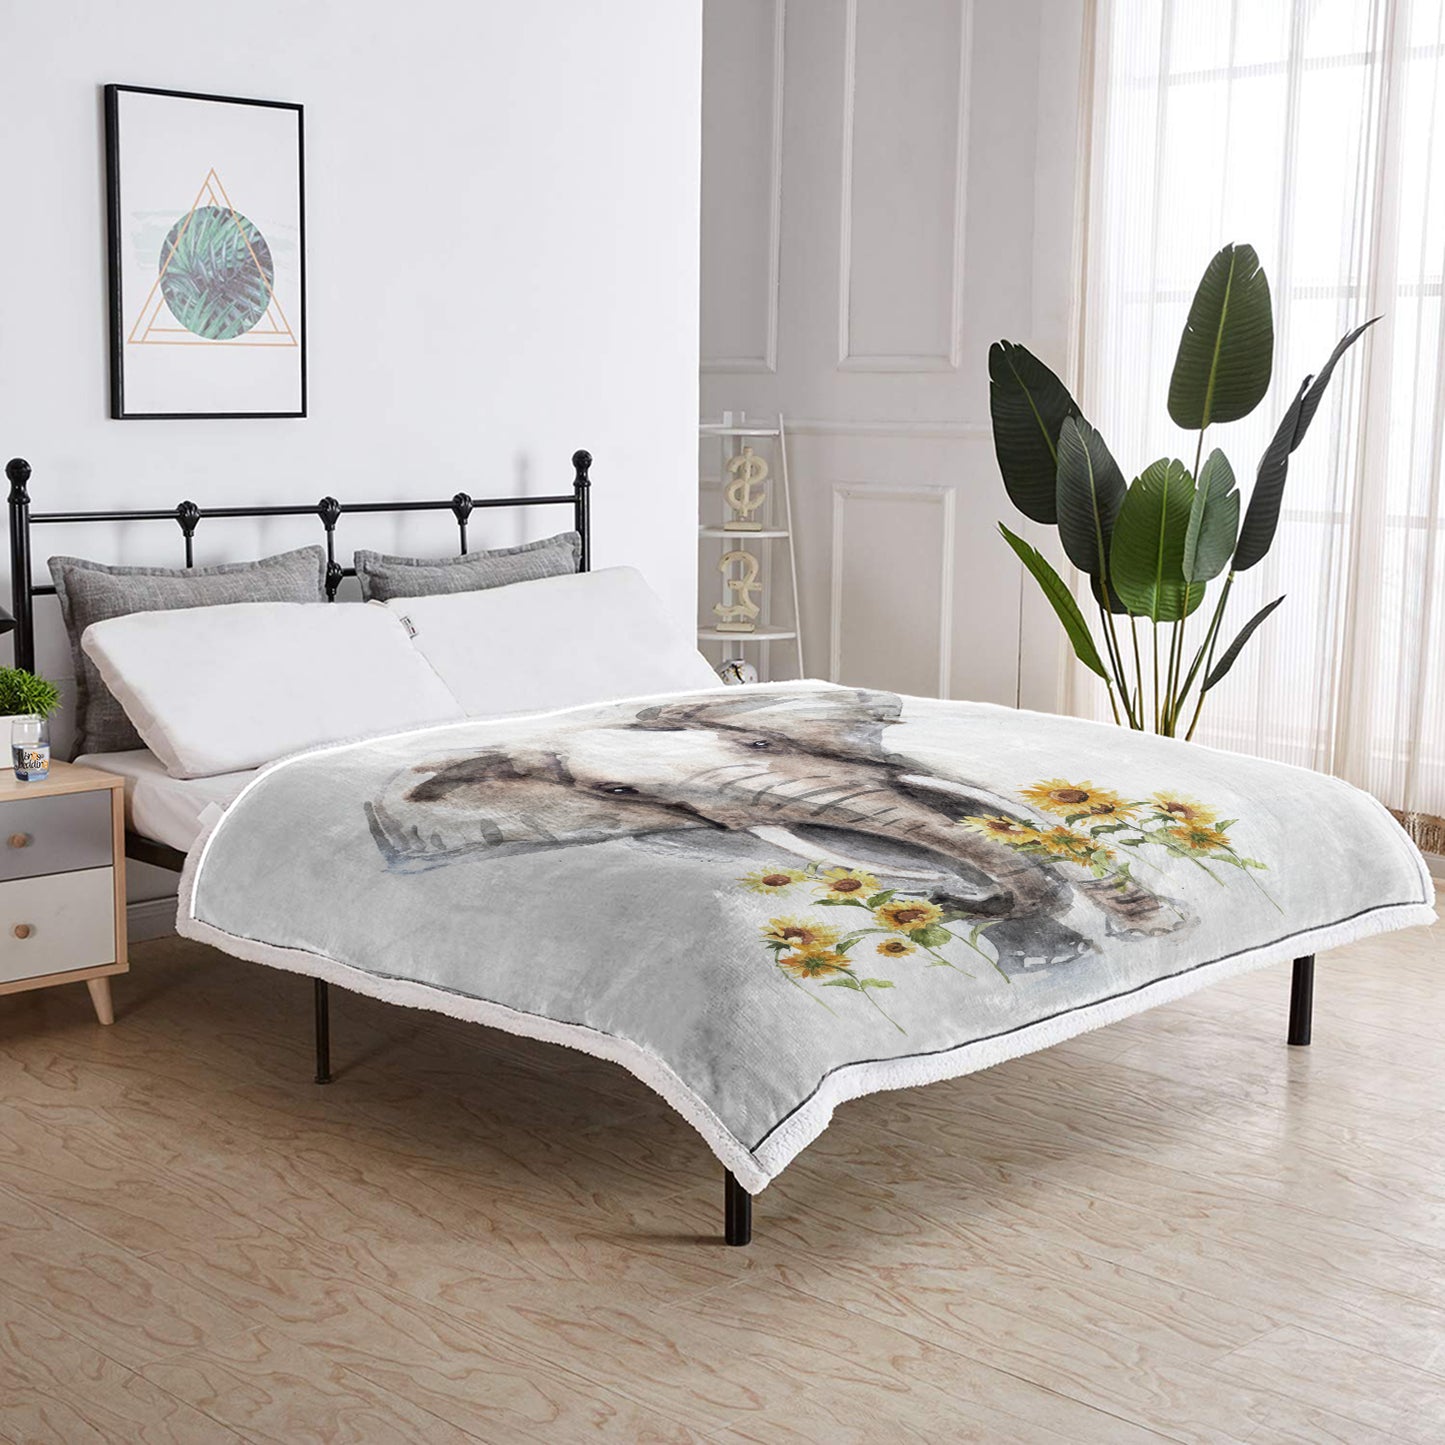 WONGS BEDDING Elephant and flower wool blankets